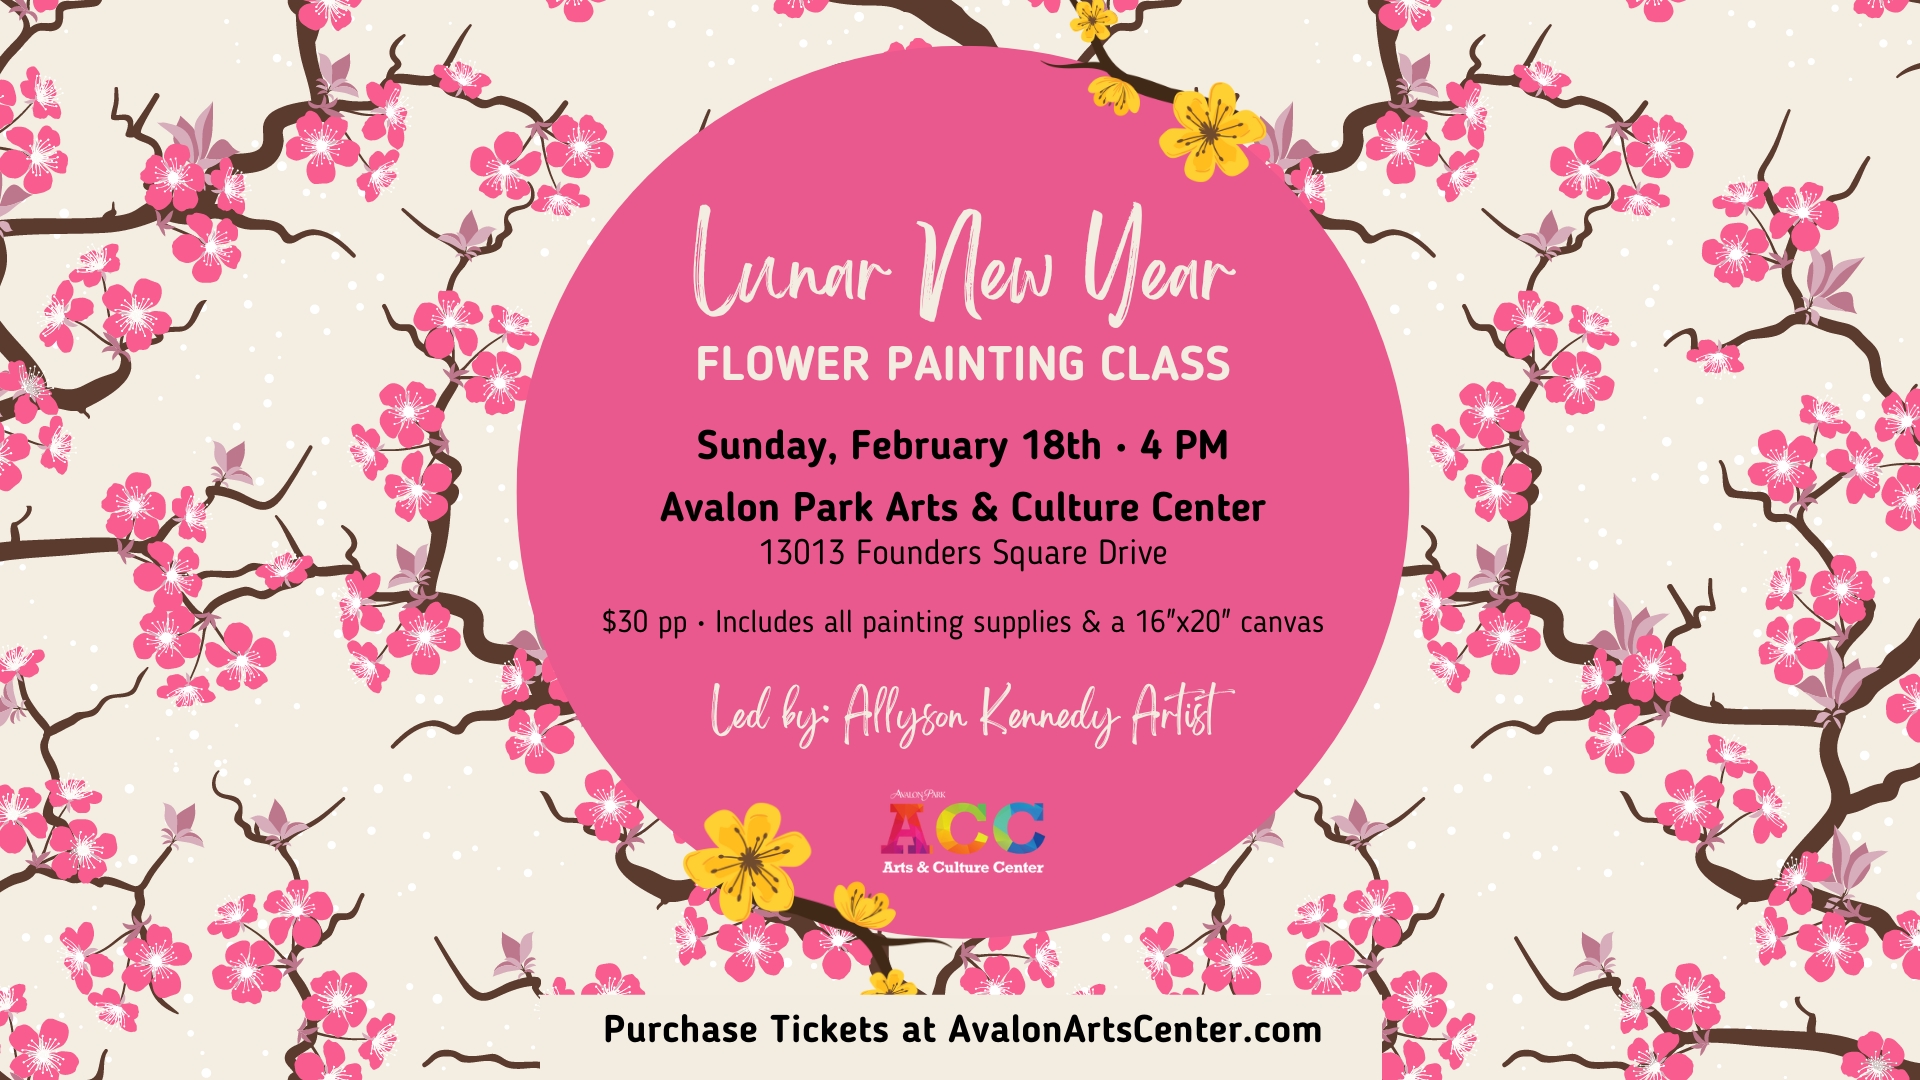 Lunar New Year Flower Painting Class cover image